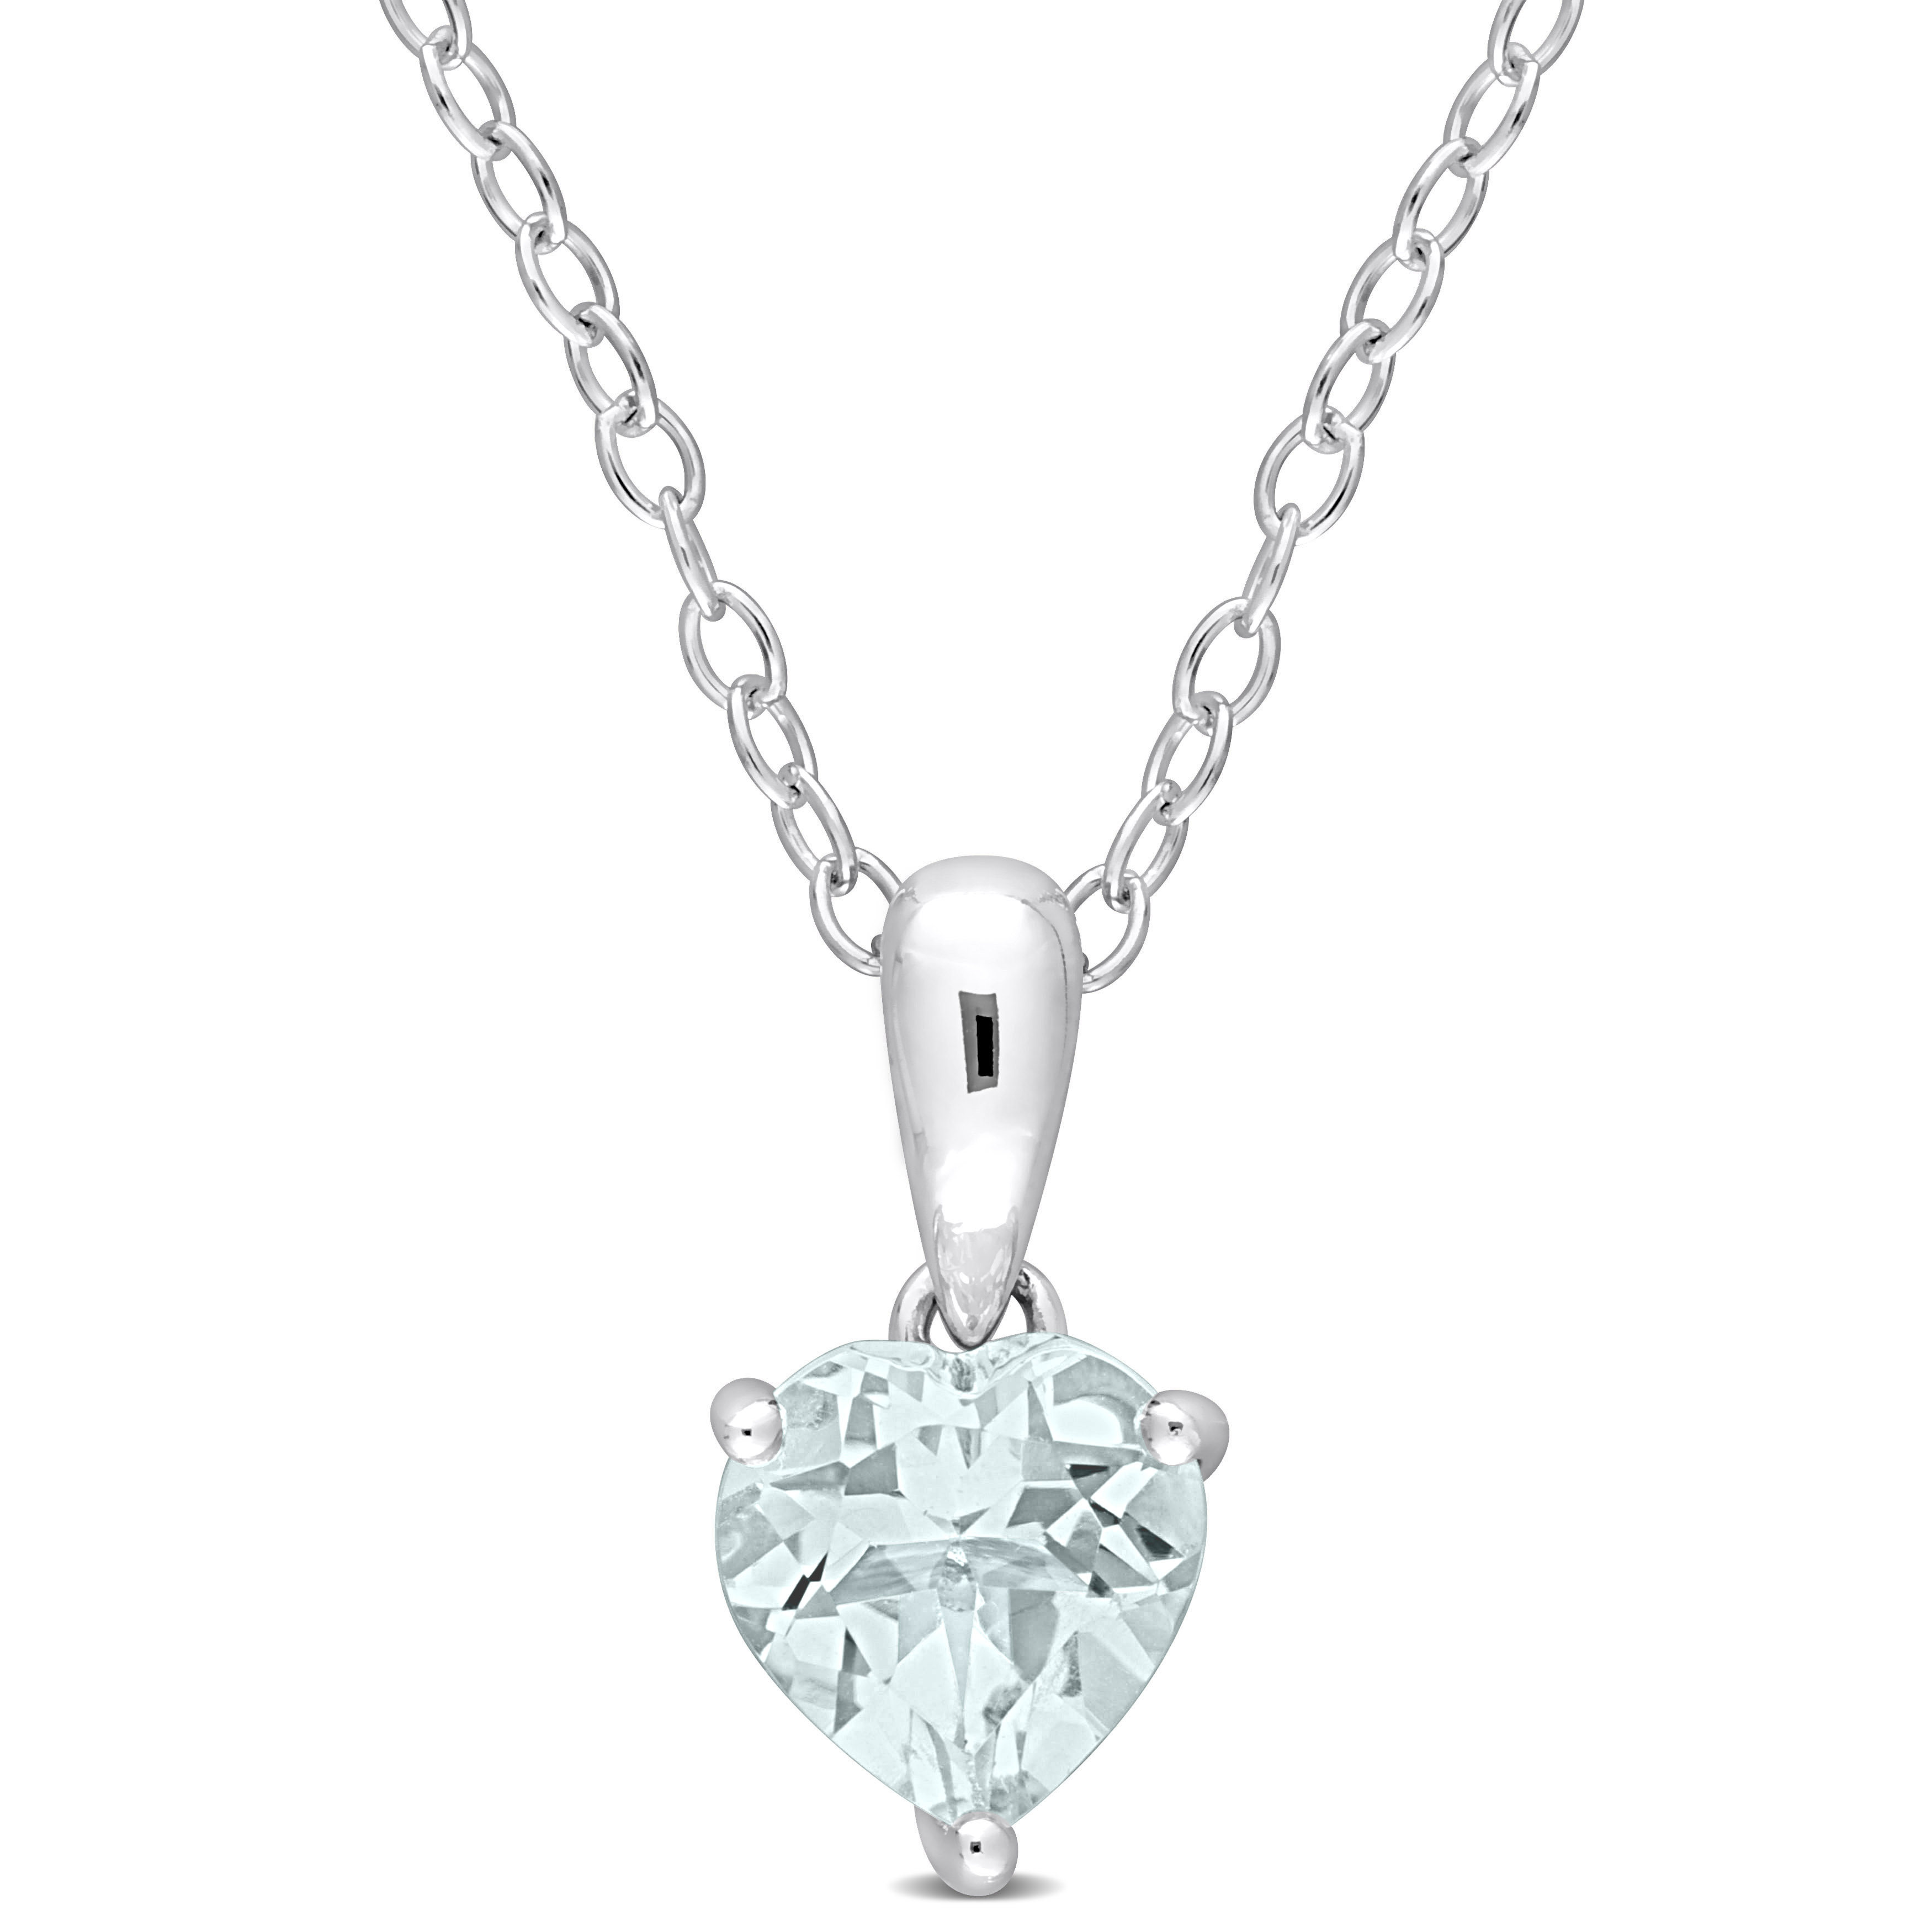 5/8 CT TGW Heart Shape Aquamarine Solitaire Heart Design Pendant with Chain in Sterling Silver - 18 in.